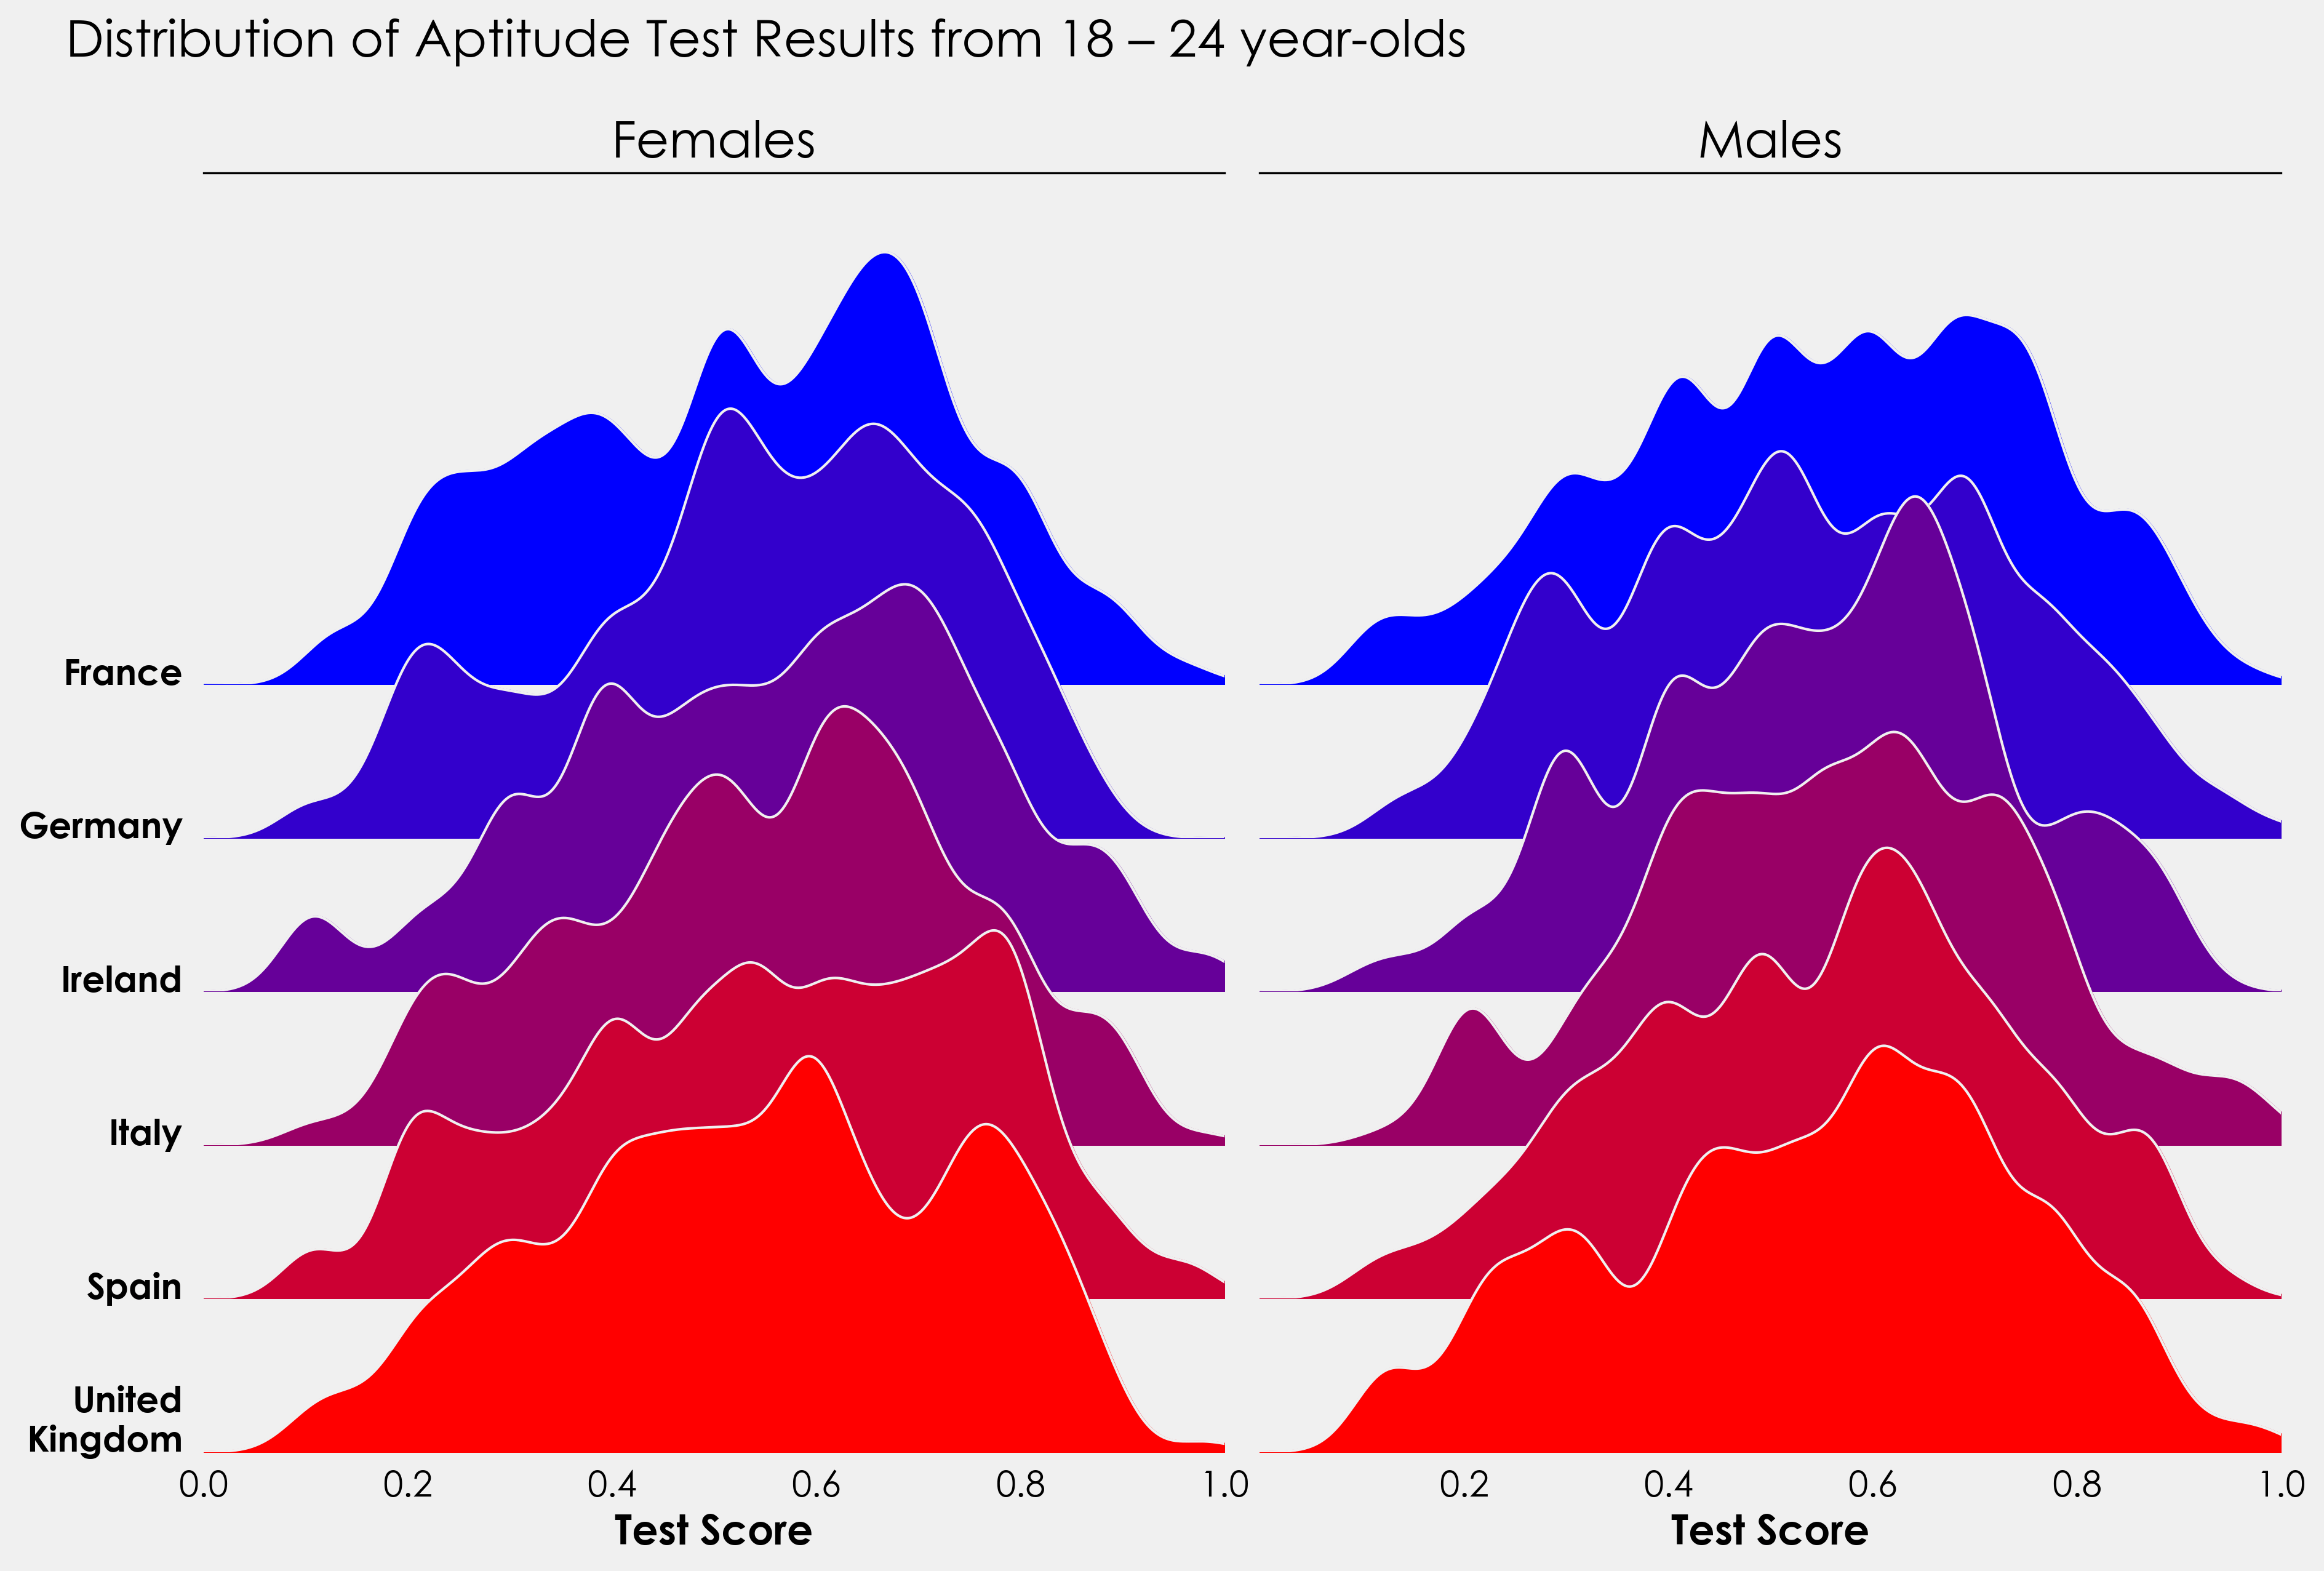 Each of two sets of six kernel density estimate (KDE) charts shows six different countries. France is blue, Germany is dark blue, Ireland is purple, Italy is a lighter shade of purple, Spain is red, and the United Kingdom is blood red. The x-axis displays the distribution of 18 to 24 year olds’ aptitude test scores in each county presented. The distribution of the results of the aptitude test among boys aged 18 to 24 in each county is shown on one of the two 6-kennel charts, while the distribution of females is shown on the other.